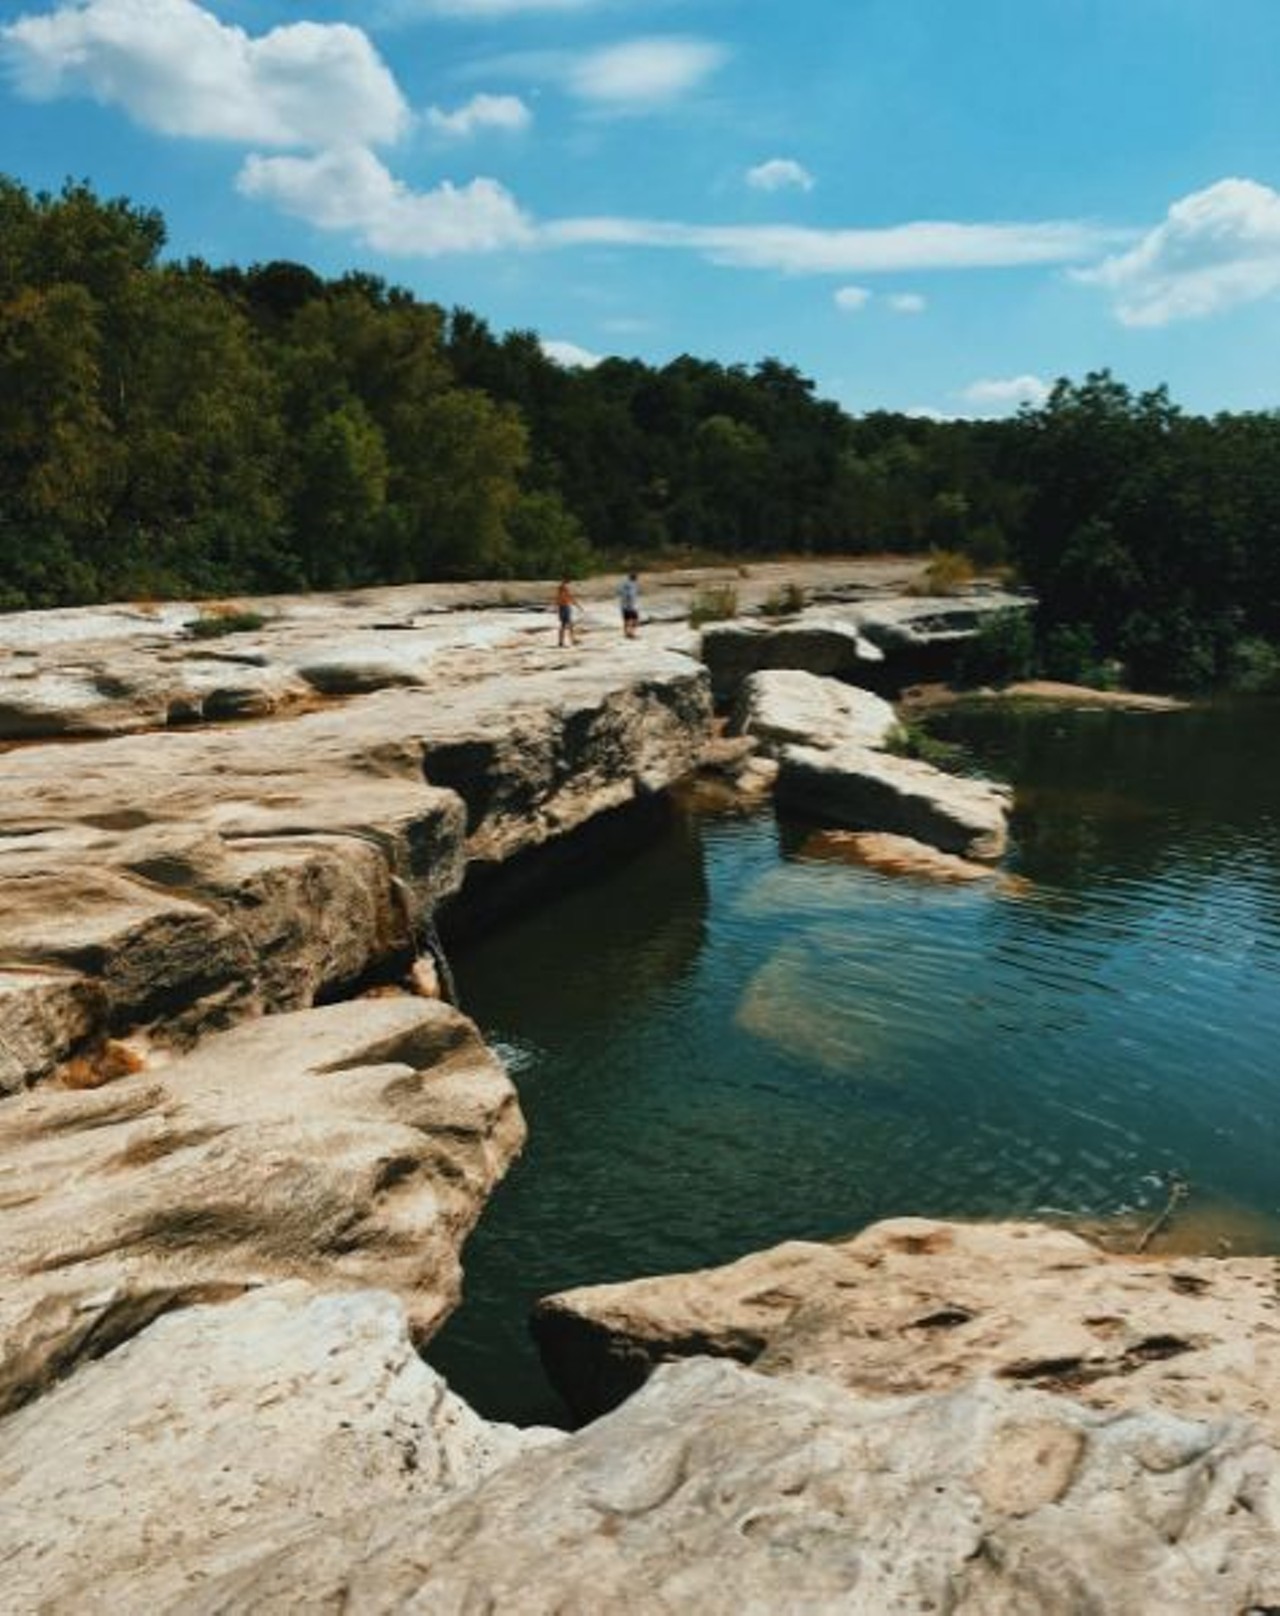 Mckinney Falls State Park
5808 McKinney Falls Pkwy, Austin, (512) 243-1643
Can we all take a moment to appreciate the fact that Texans can experience these beautiful views first-hand, and for the affordable price of $6 per person? Amazing.
Photo via Instagram, victoria.w